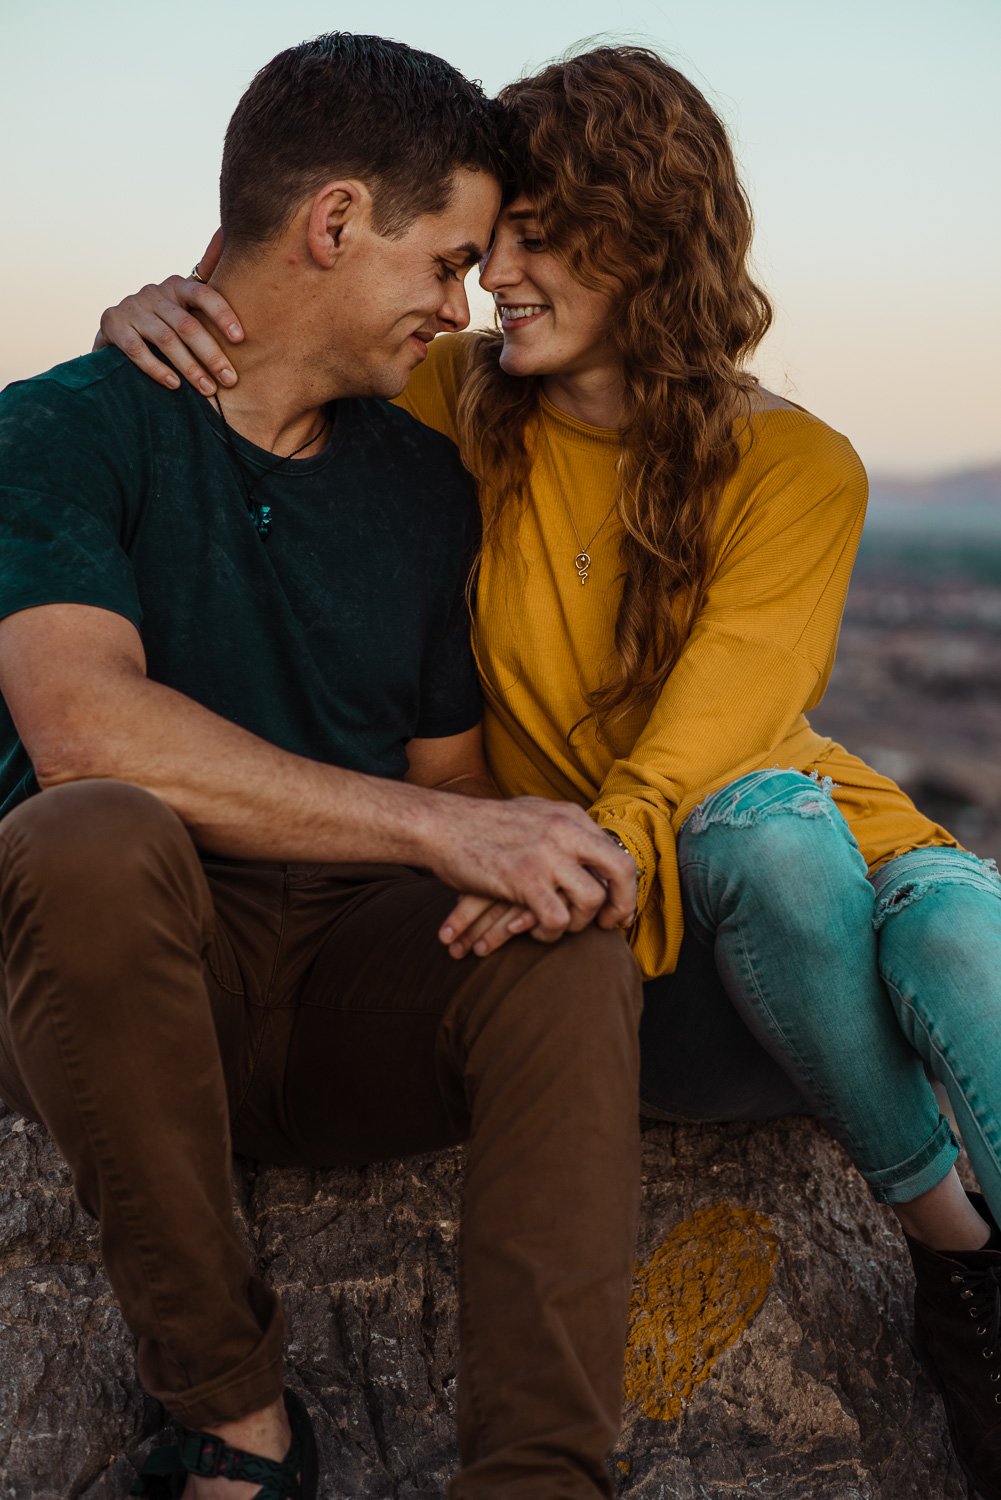 couples photography in las vegas at lone mountain during golden hour